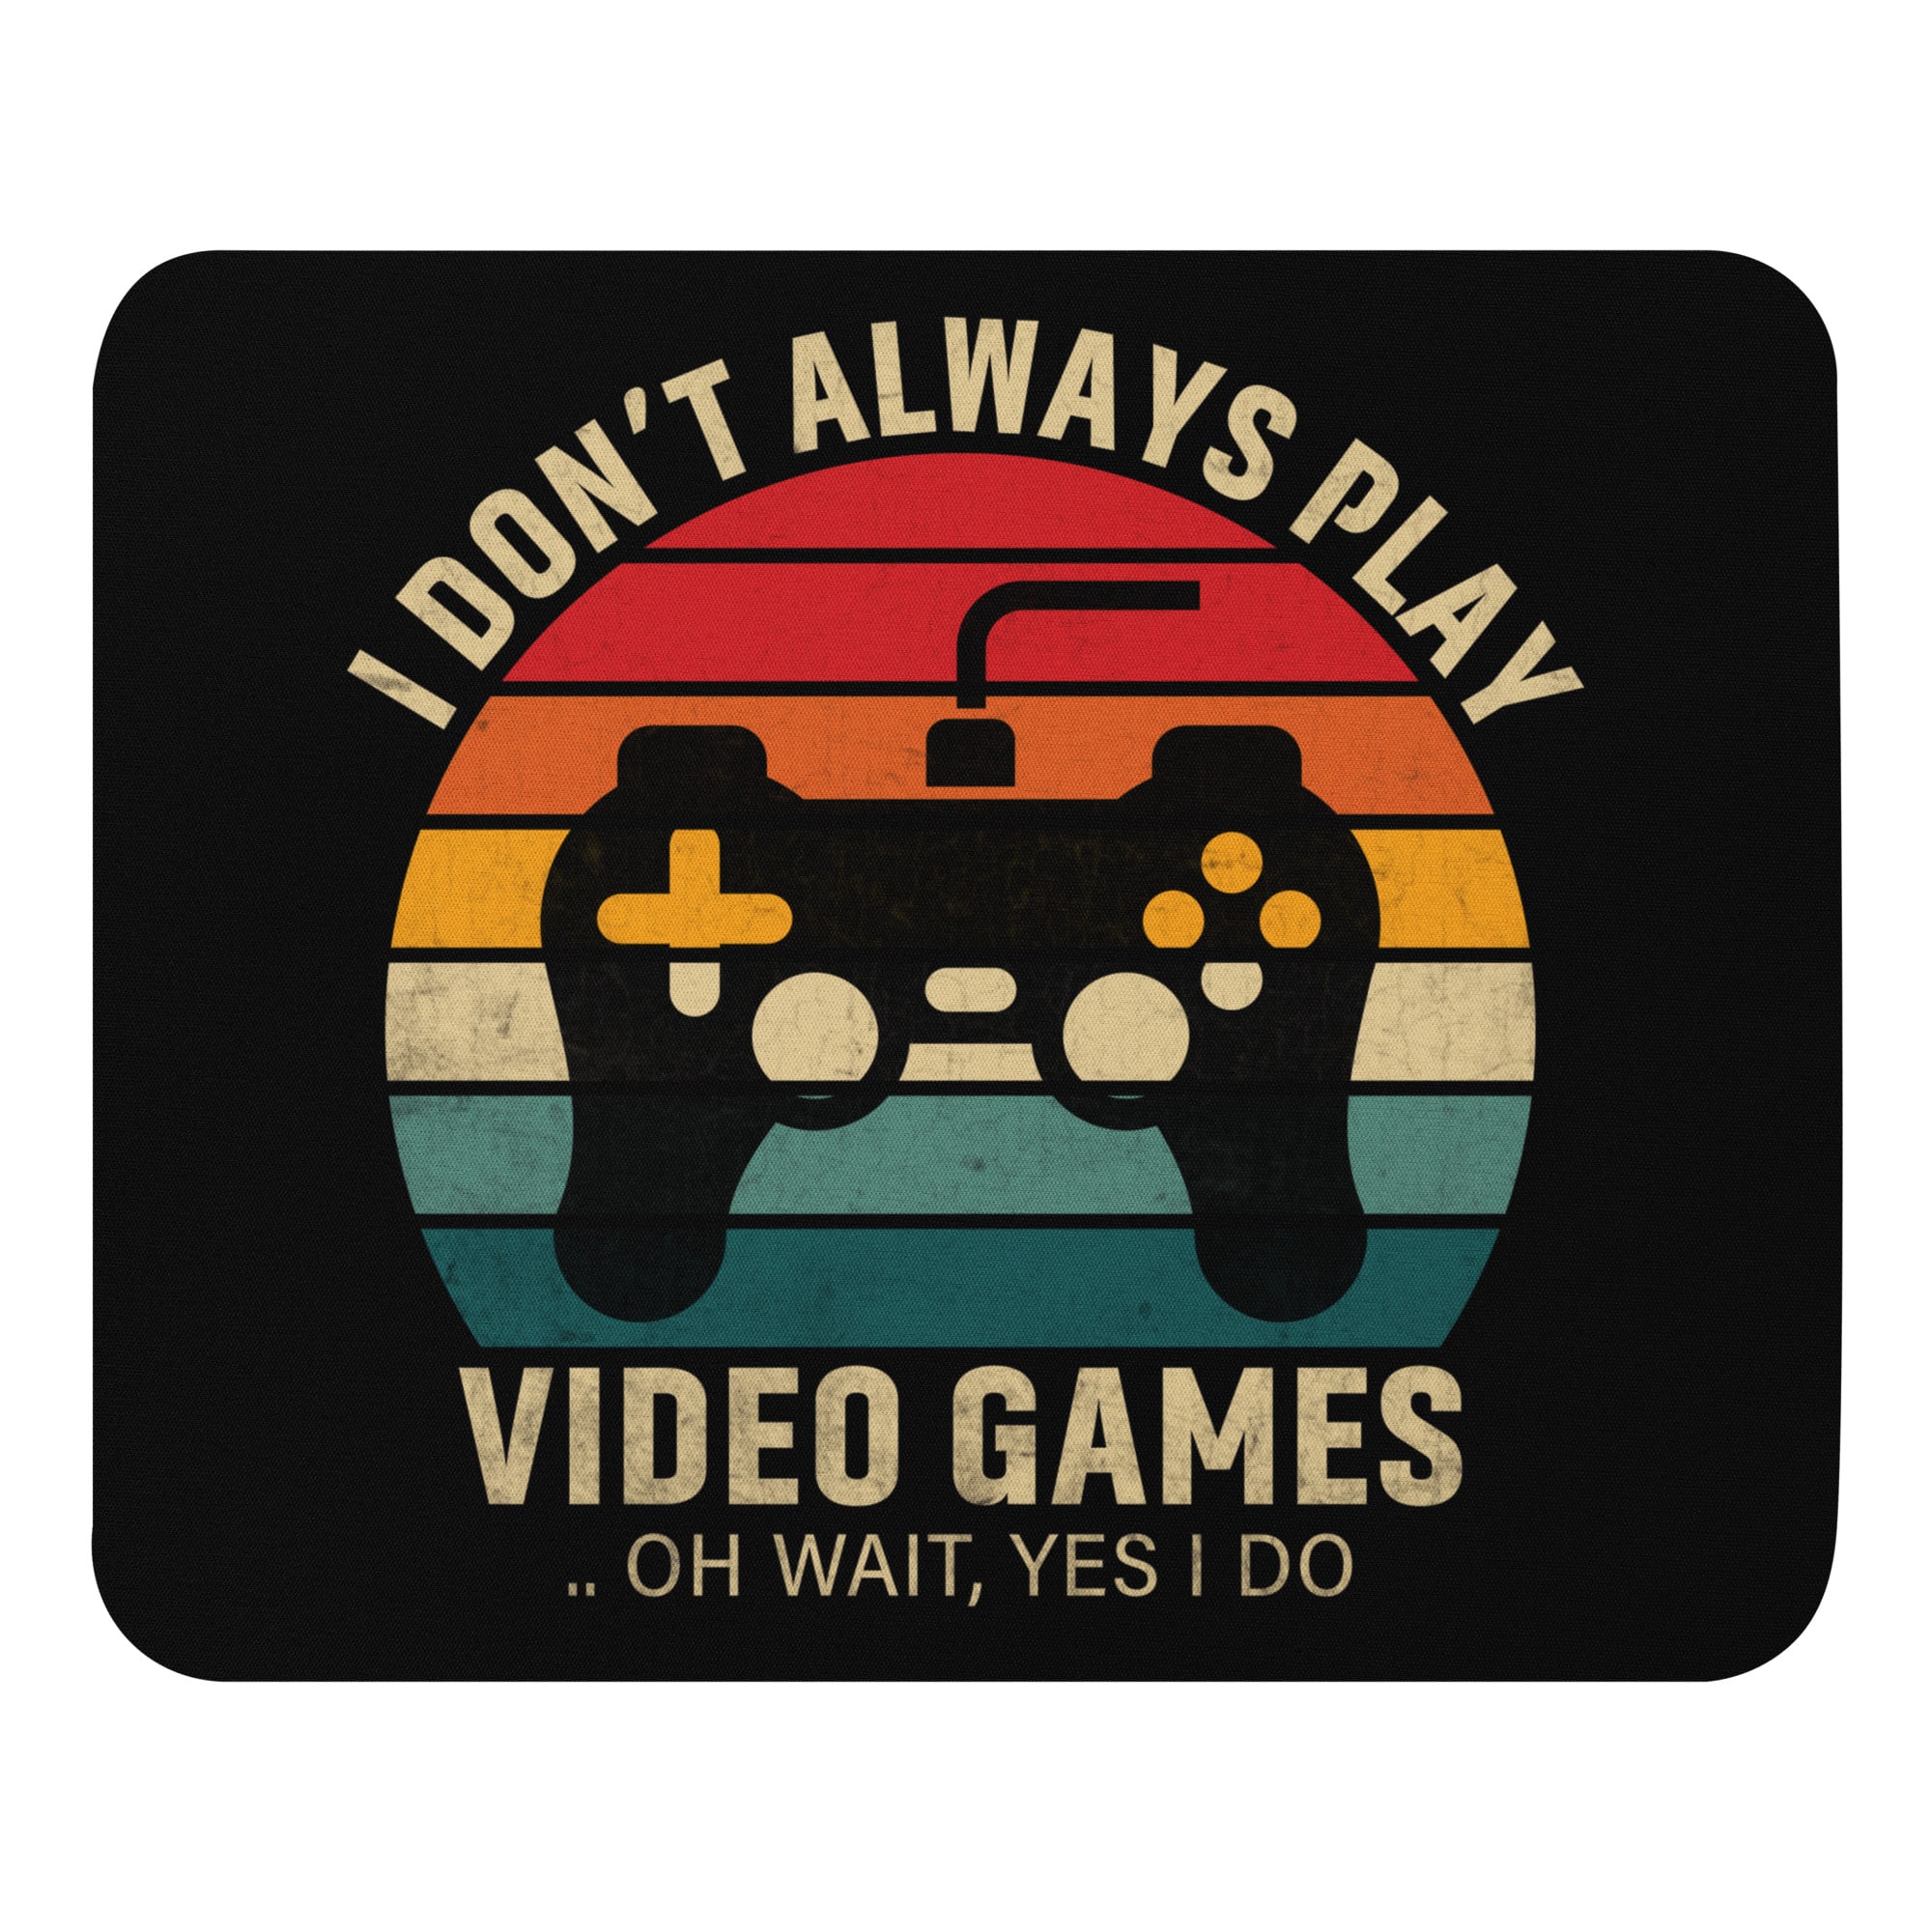 I Dont Always Play Video Games Mouse pad Funny gaming mouse pad Gaming humor mouse pad Gamer quote mouse pad Gaming desk accessory Unique mouse pads Gaming lifestyle accessory Gamer gift idea Gaming themed mouse pad Novelty mouse pads Cool mouse pad designs Video game store Gaming merchandise Gaming accessories shop Online gaming store Video game shop near me Gaming console store PC gaming store Gaming gear shop Retro gaming shop Board game shop Anime merchandise Anime store online Japanese anime shop Anime figurines Manga shop Anime DVDs Anime accessories Anime apparel Anime collectibles Anime gifts